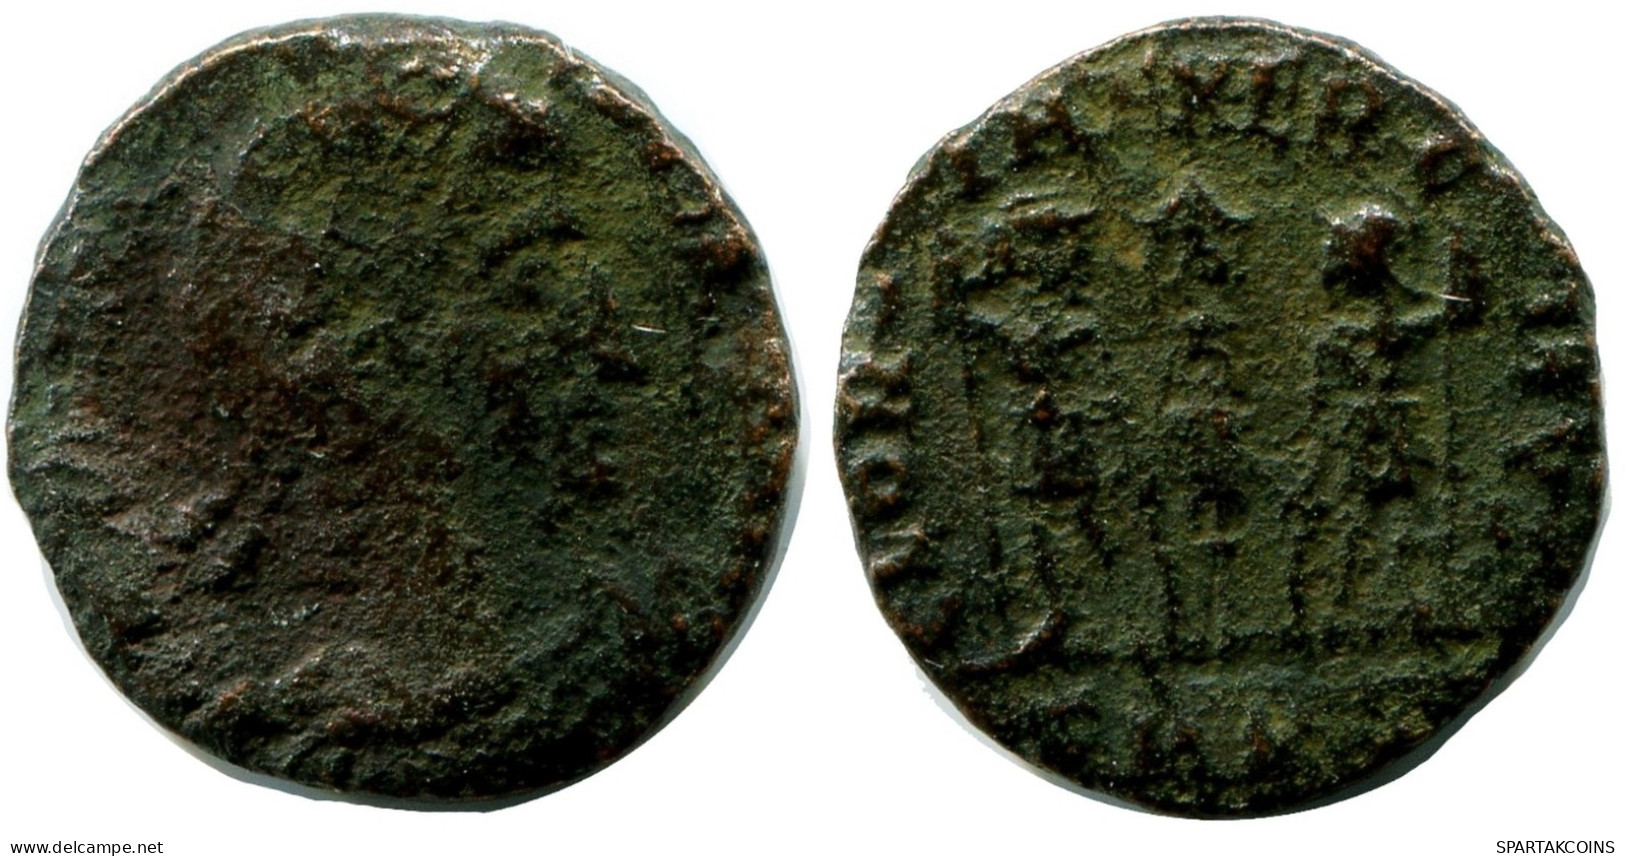 ROMAN Coin MINTED IN CYZICUS FOUND IN IHNASYAH HOARD EGYPT #ANC11047.14.D.A - El Impero Christiano (307 / 363)